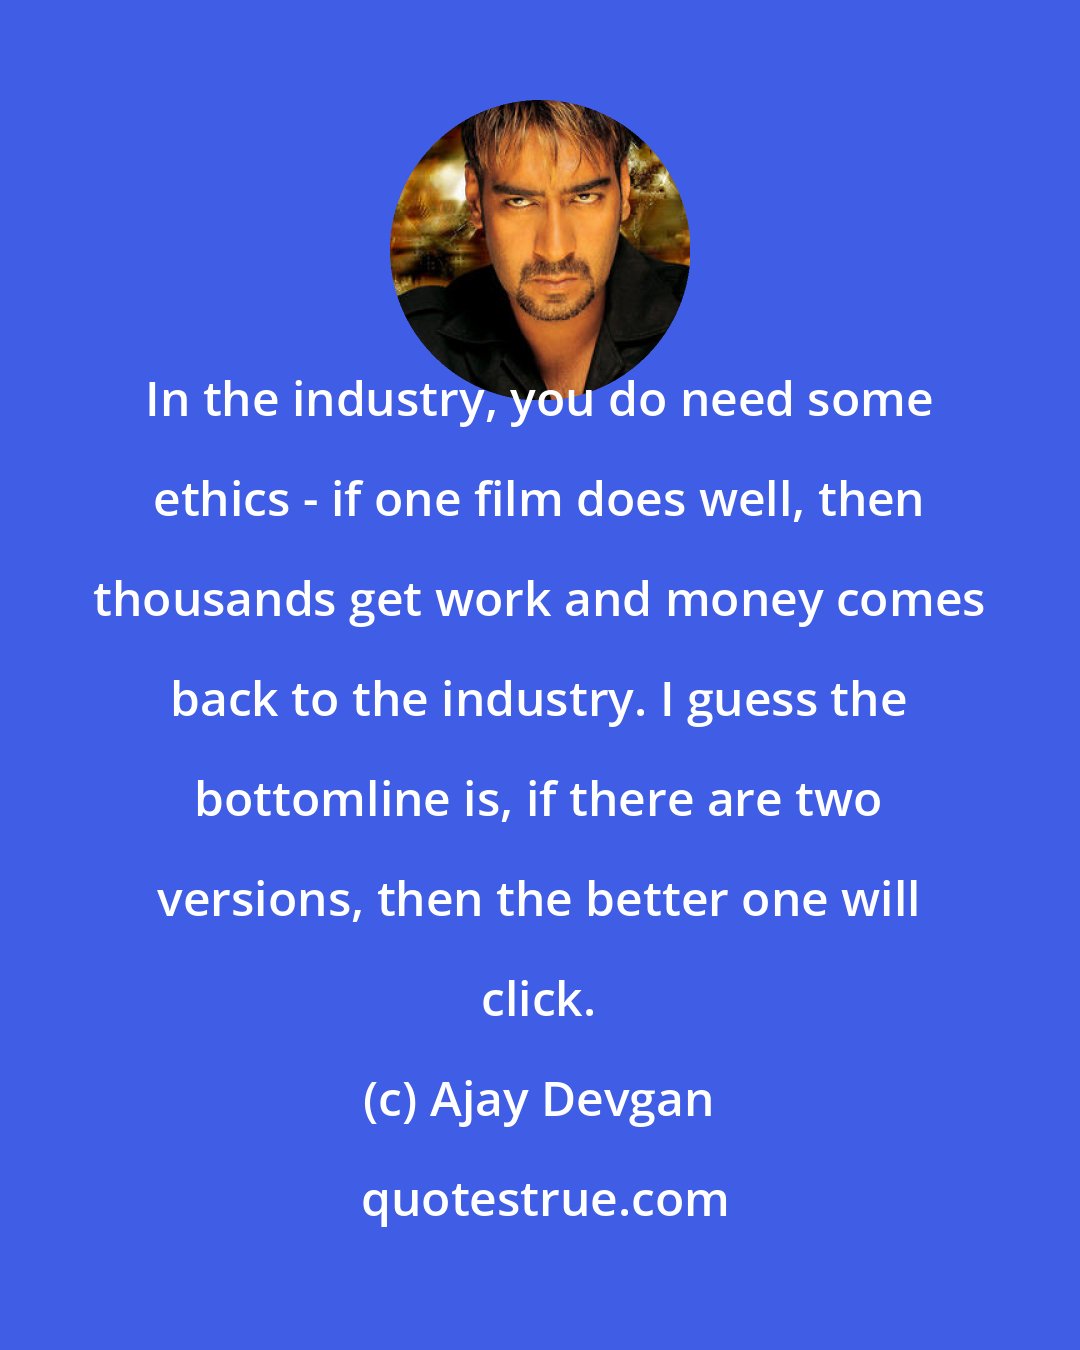 Ajay Devgan: In the industry, you do need some ethics - if one film does well, then thousands get work and money comes back to the industry. I guess the bottomline is, if there are two versions, then the better one will click.